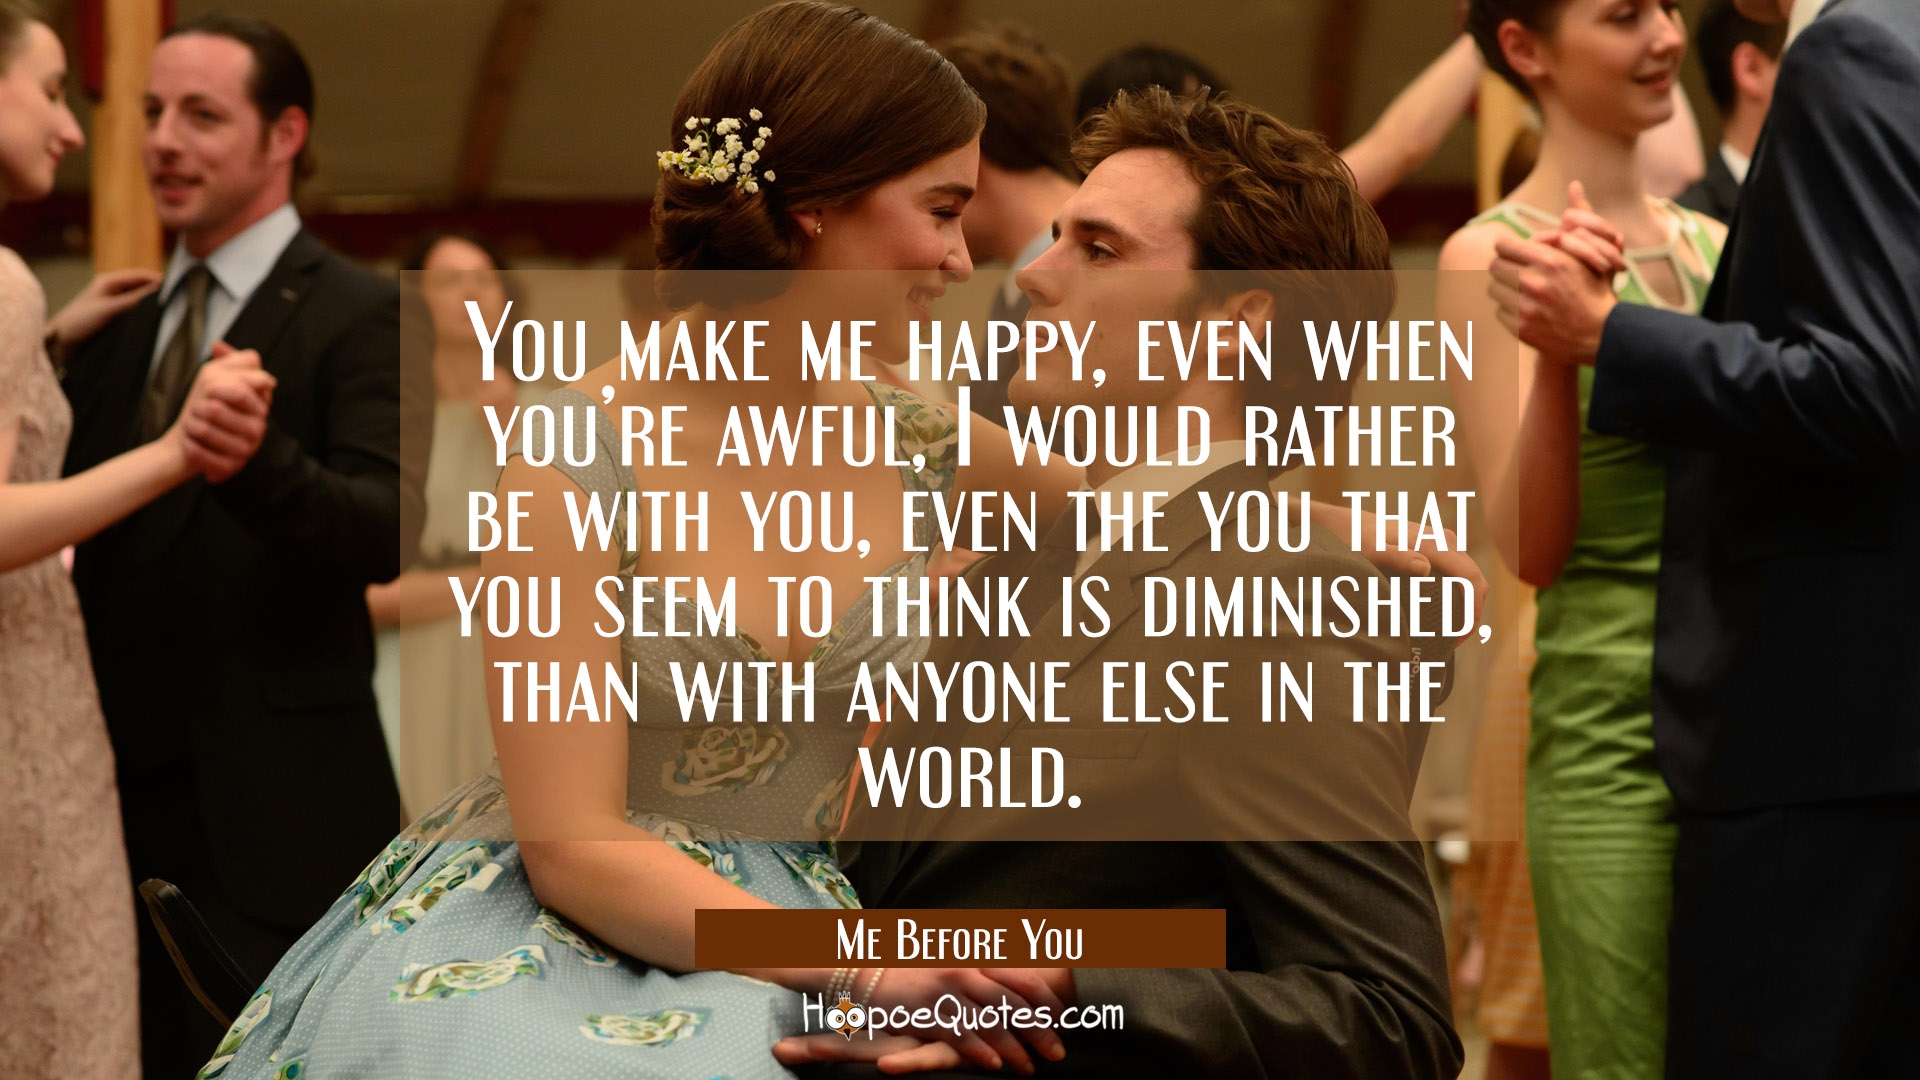 Quotes From Me Before You Movie - HD Wallpaper 